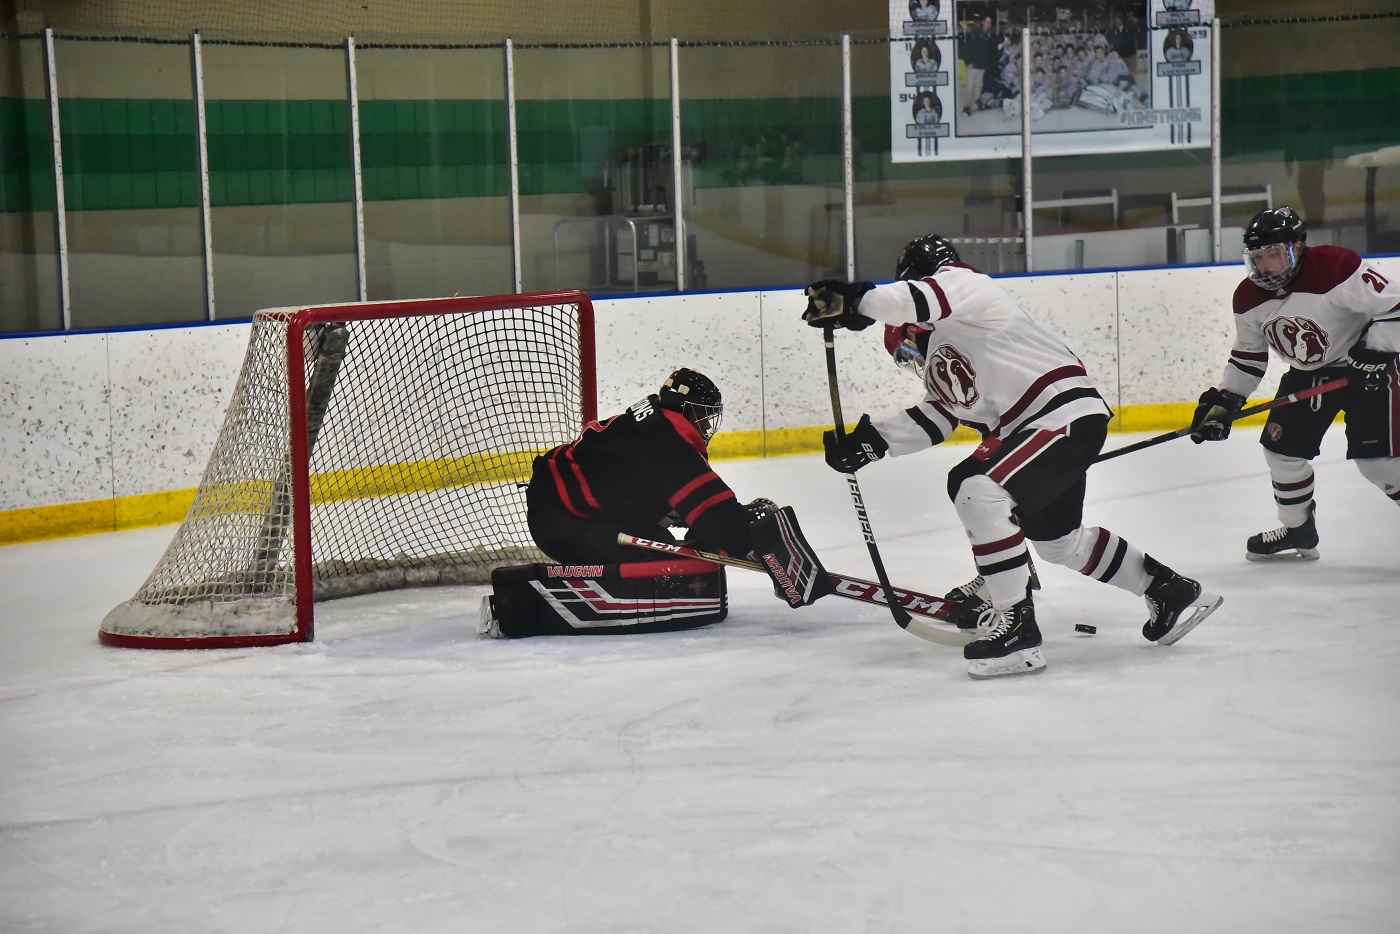 Elijah Gibbons recorded 40 saves for the Cardinals